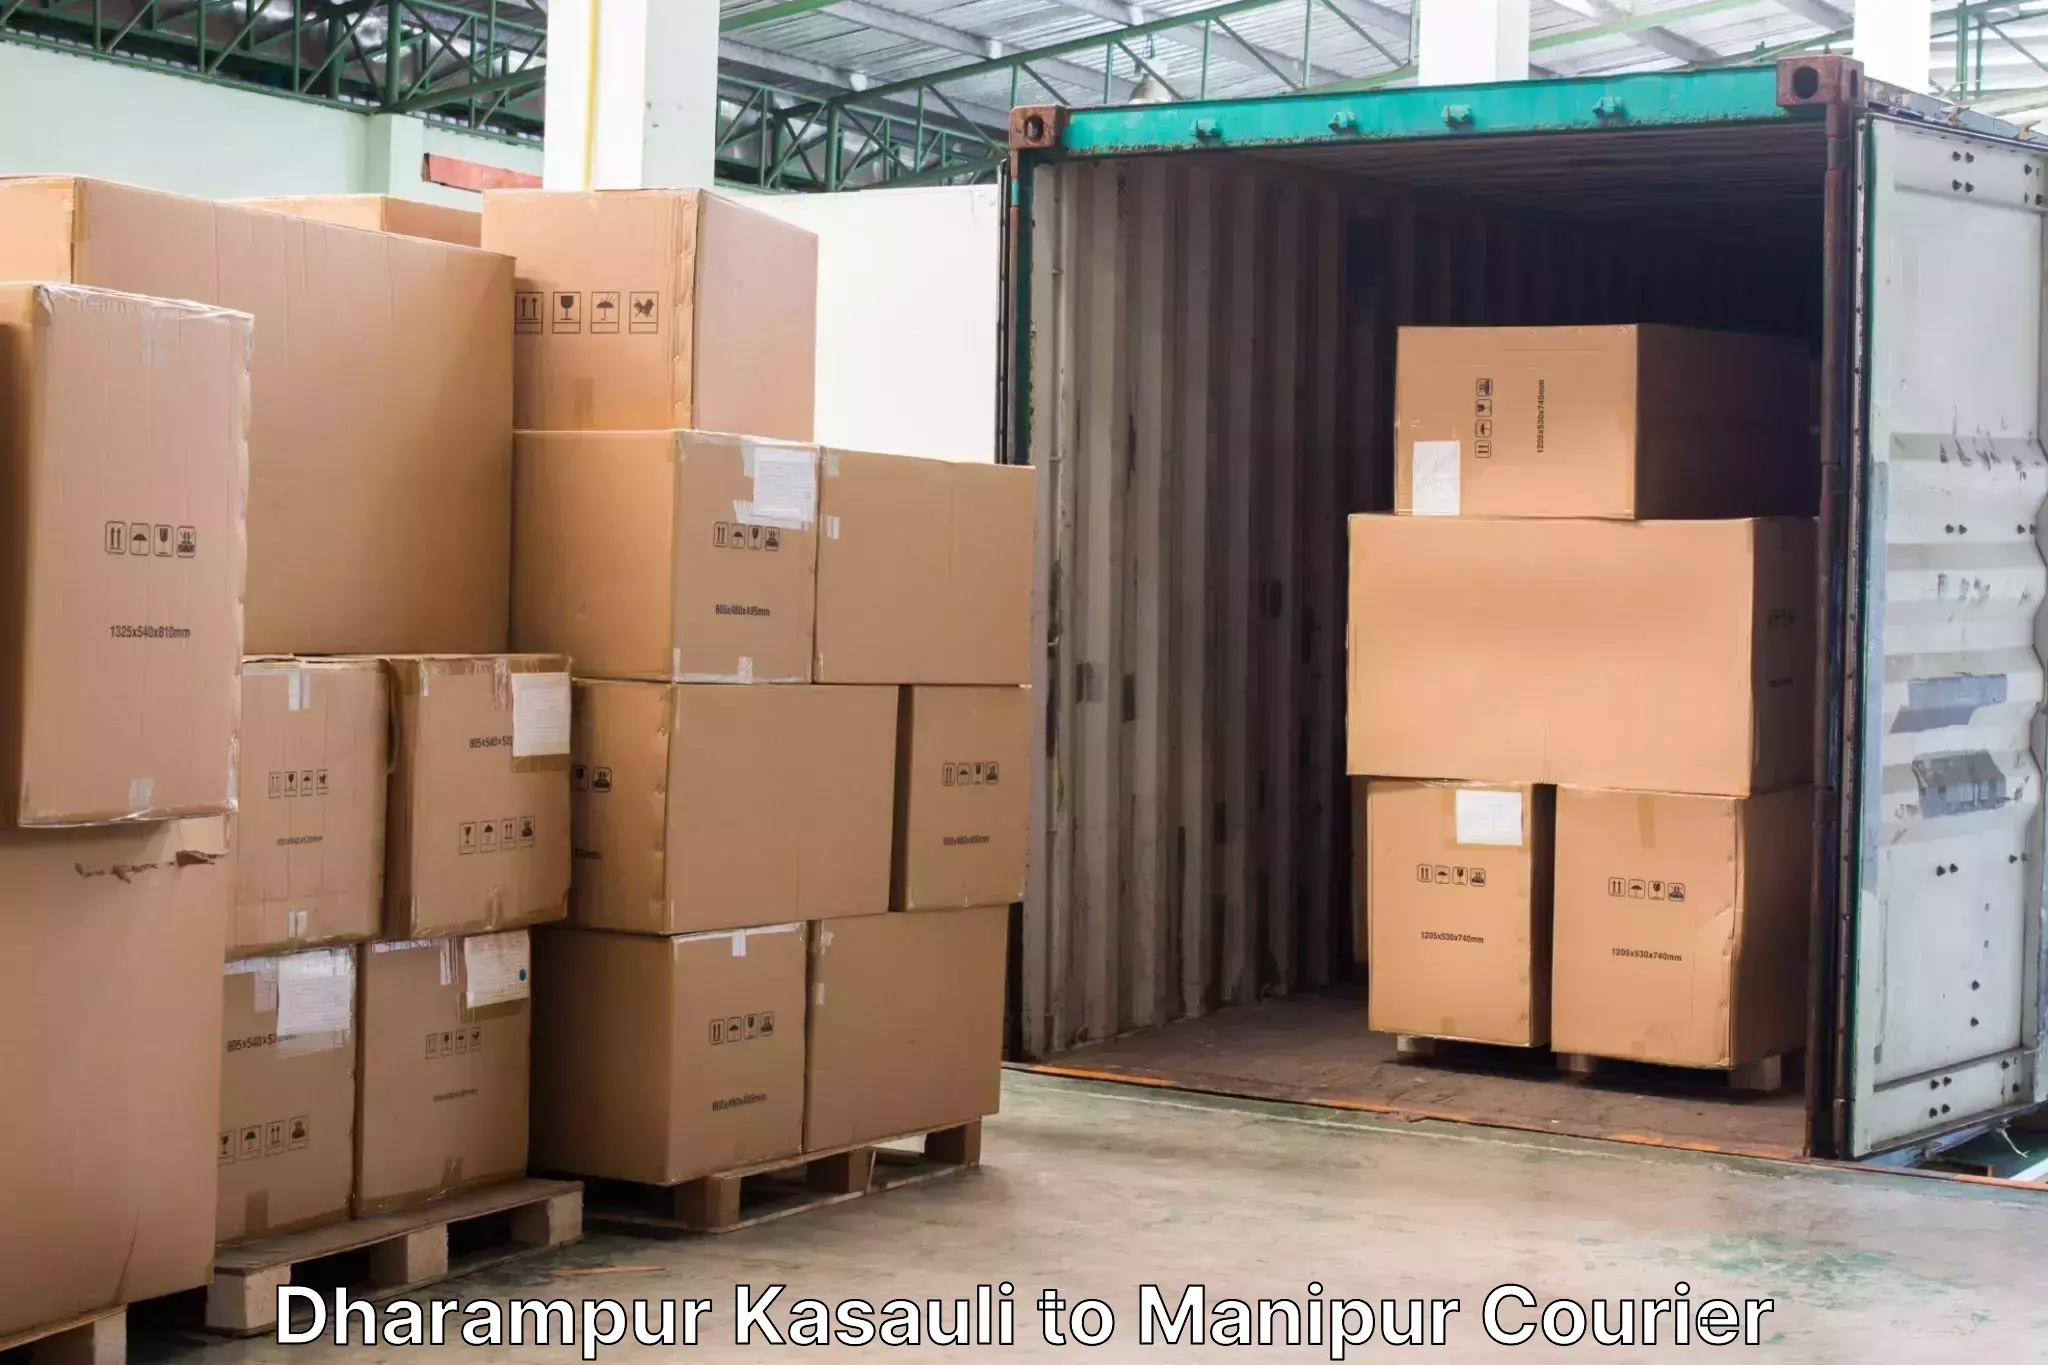 Luggage shipment specialists Dharampur Kasauli to Moirang